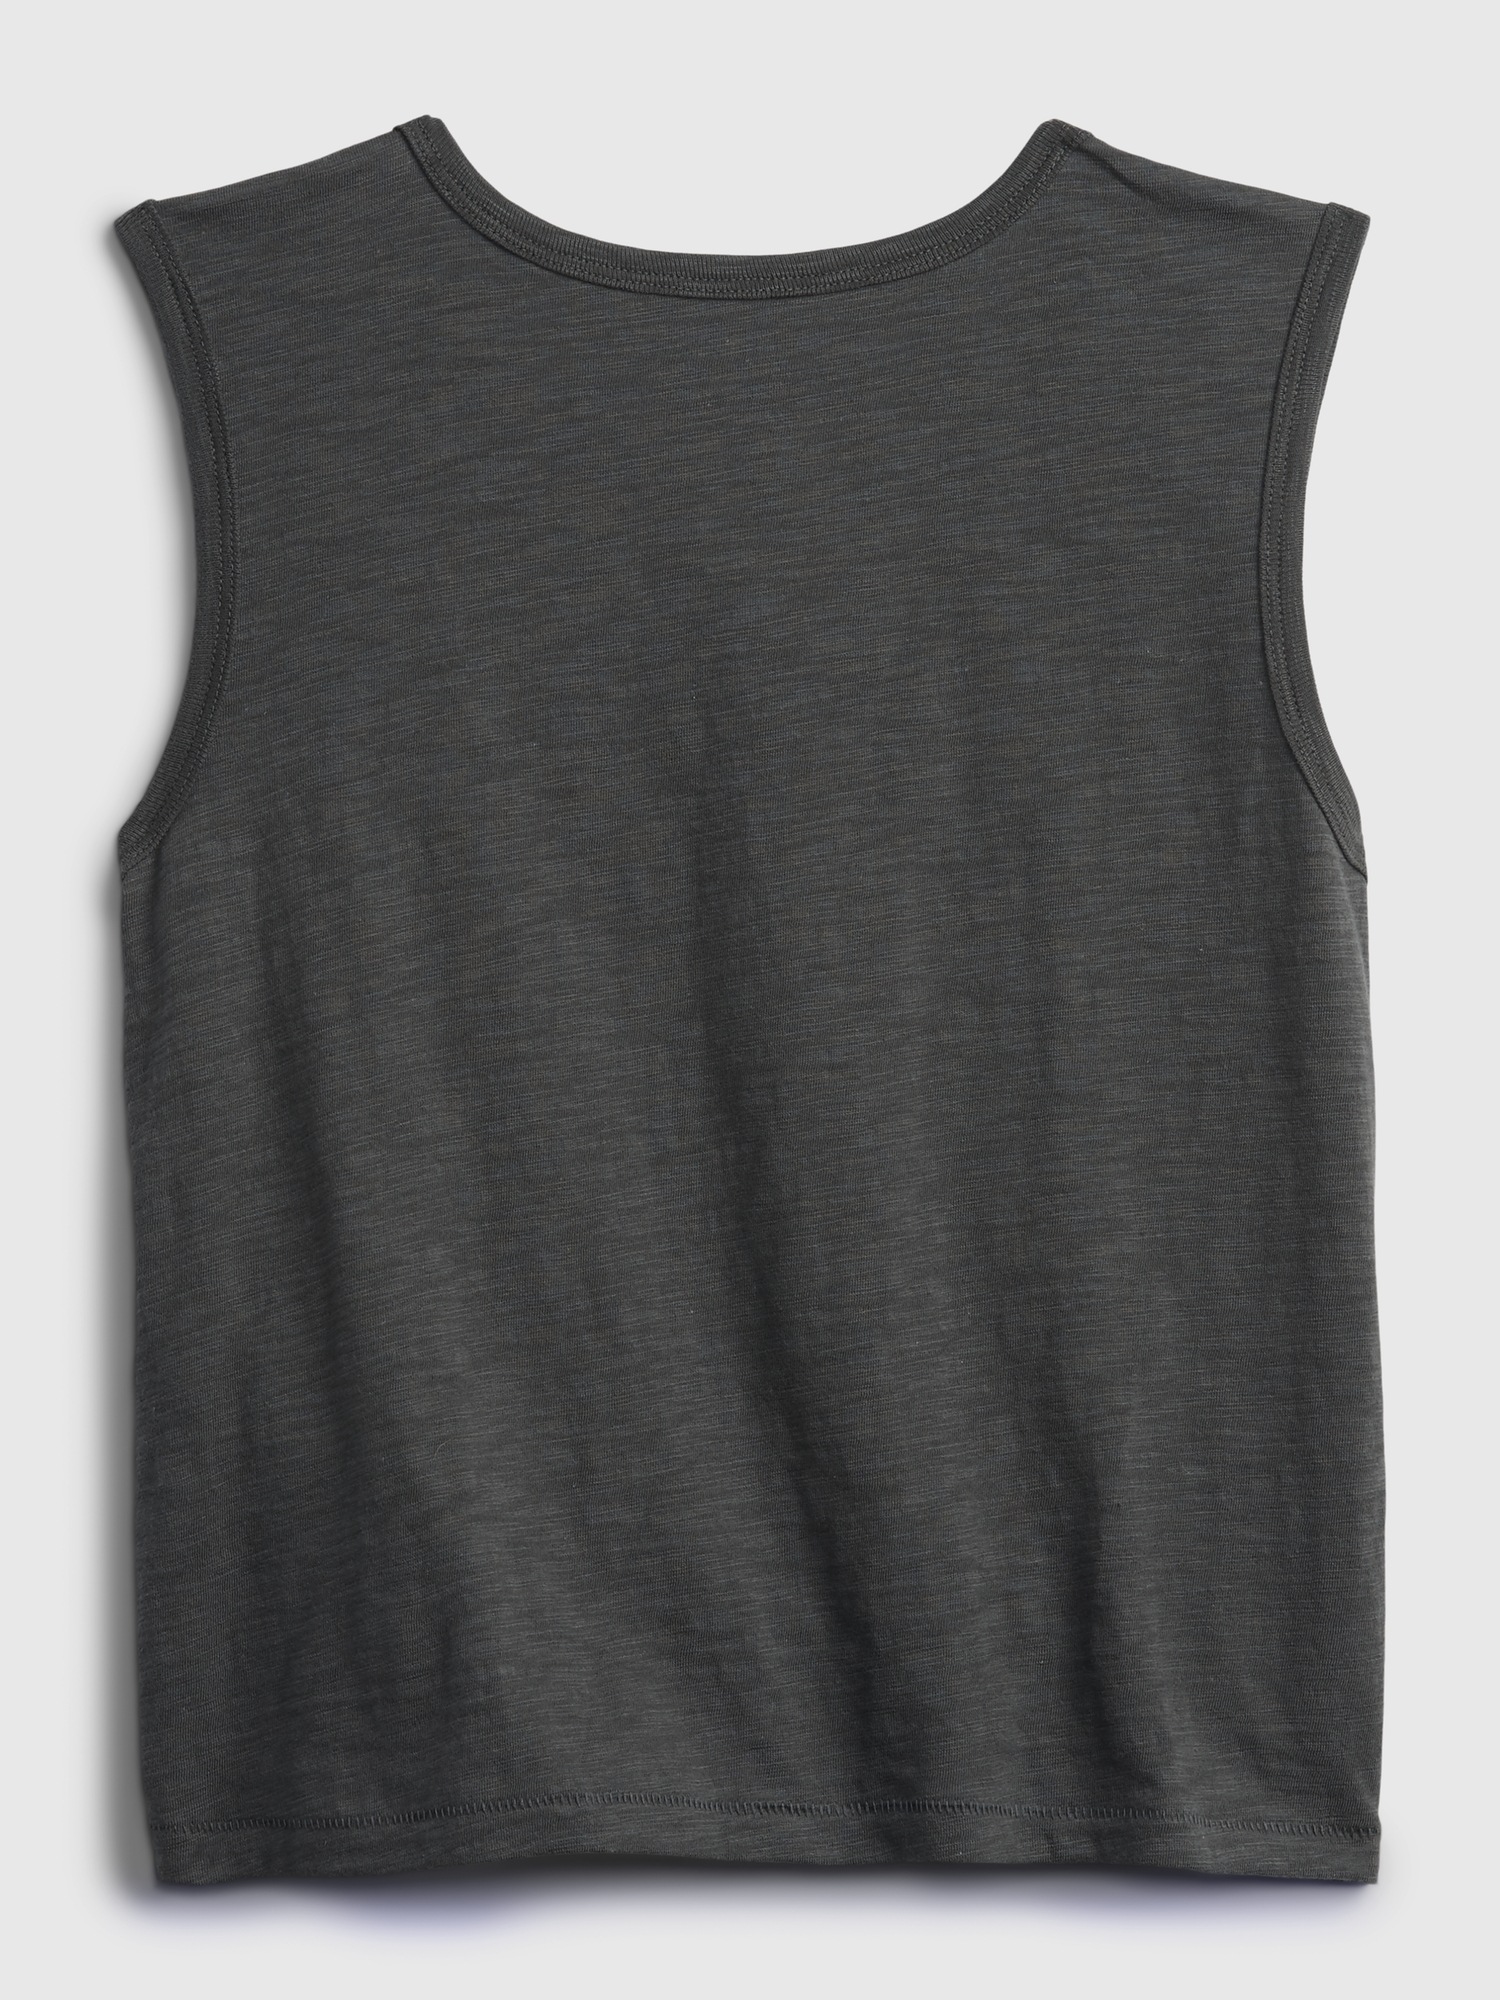 Made in USA 100% Organic Cotton Tank Top by Rawganique (Unisex)